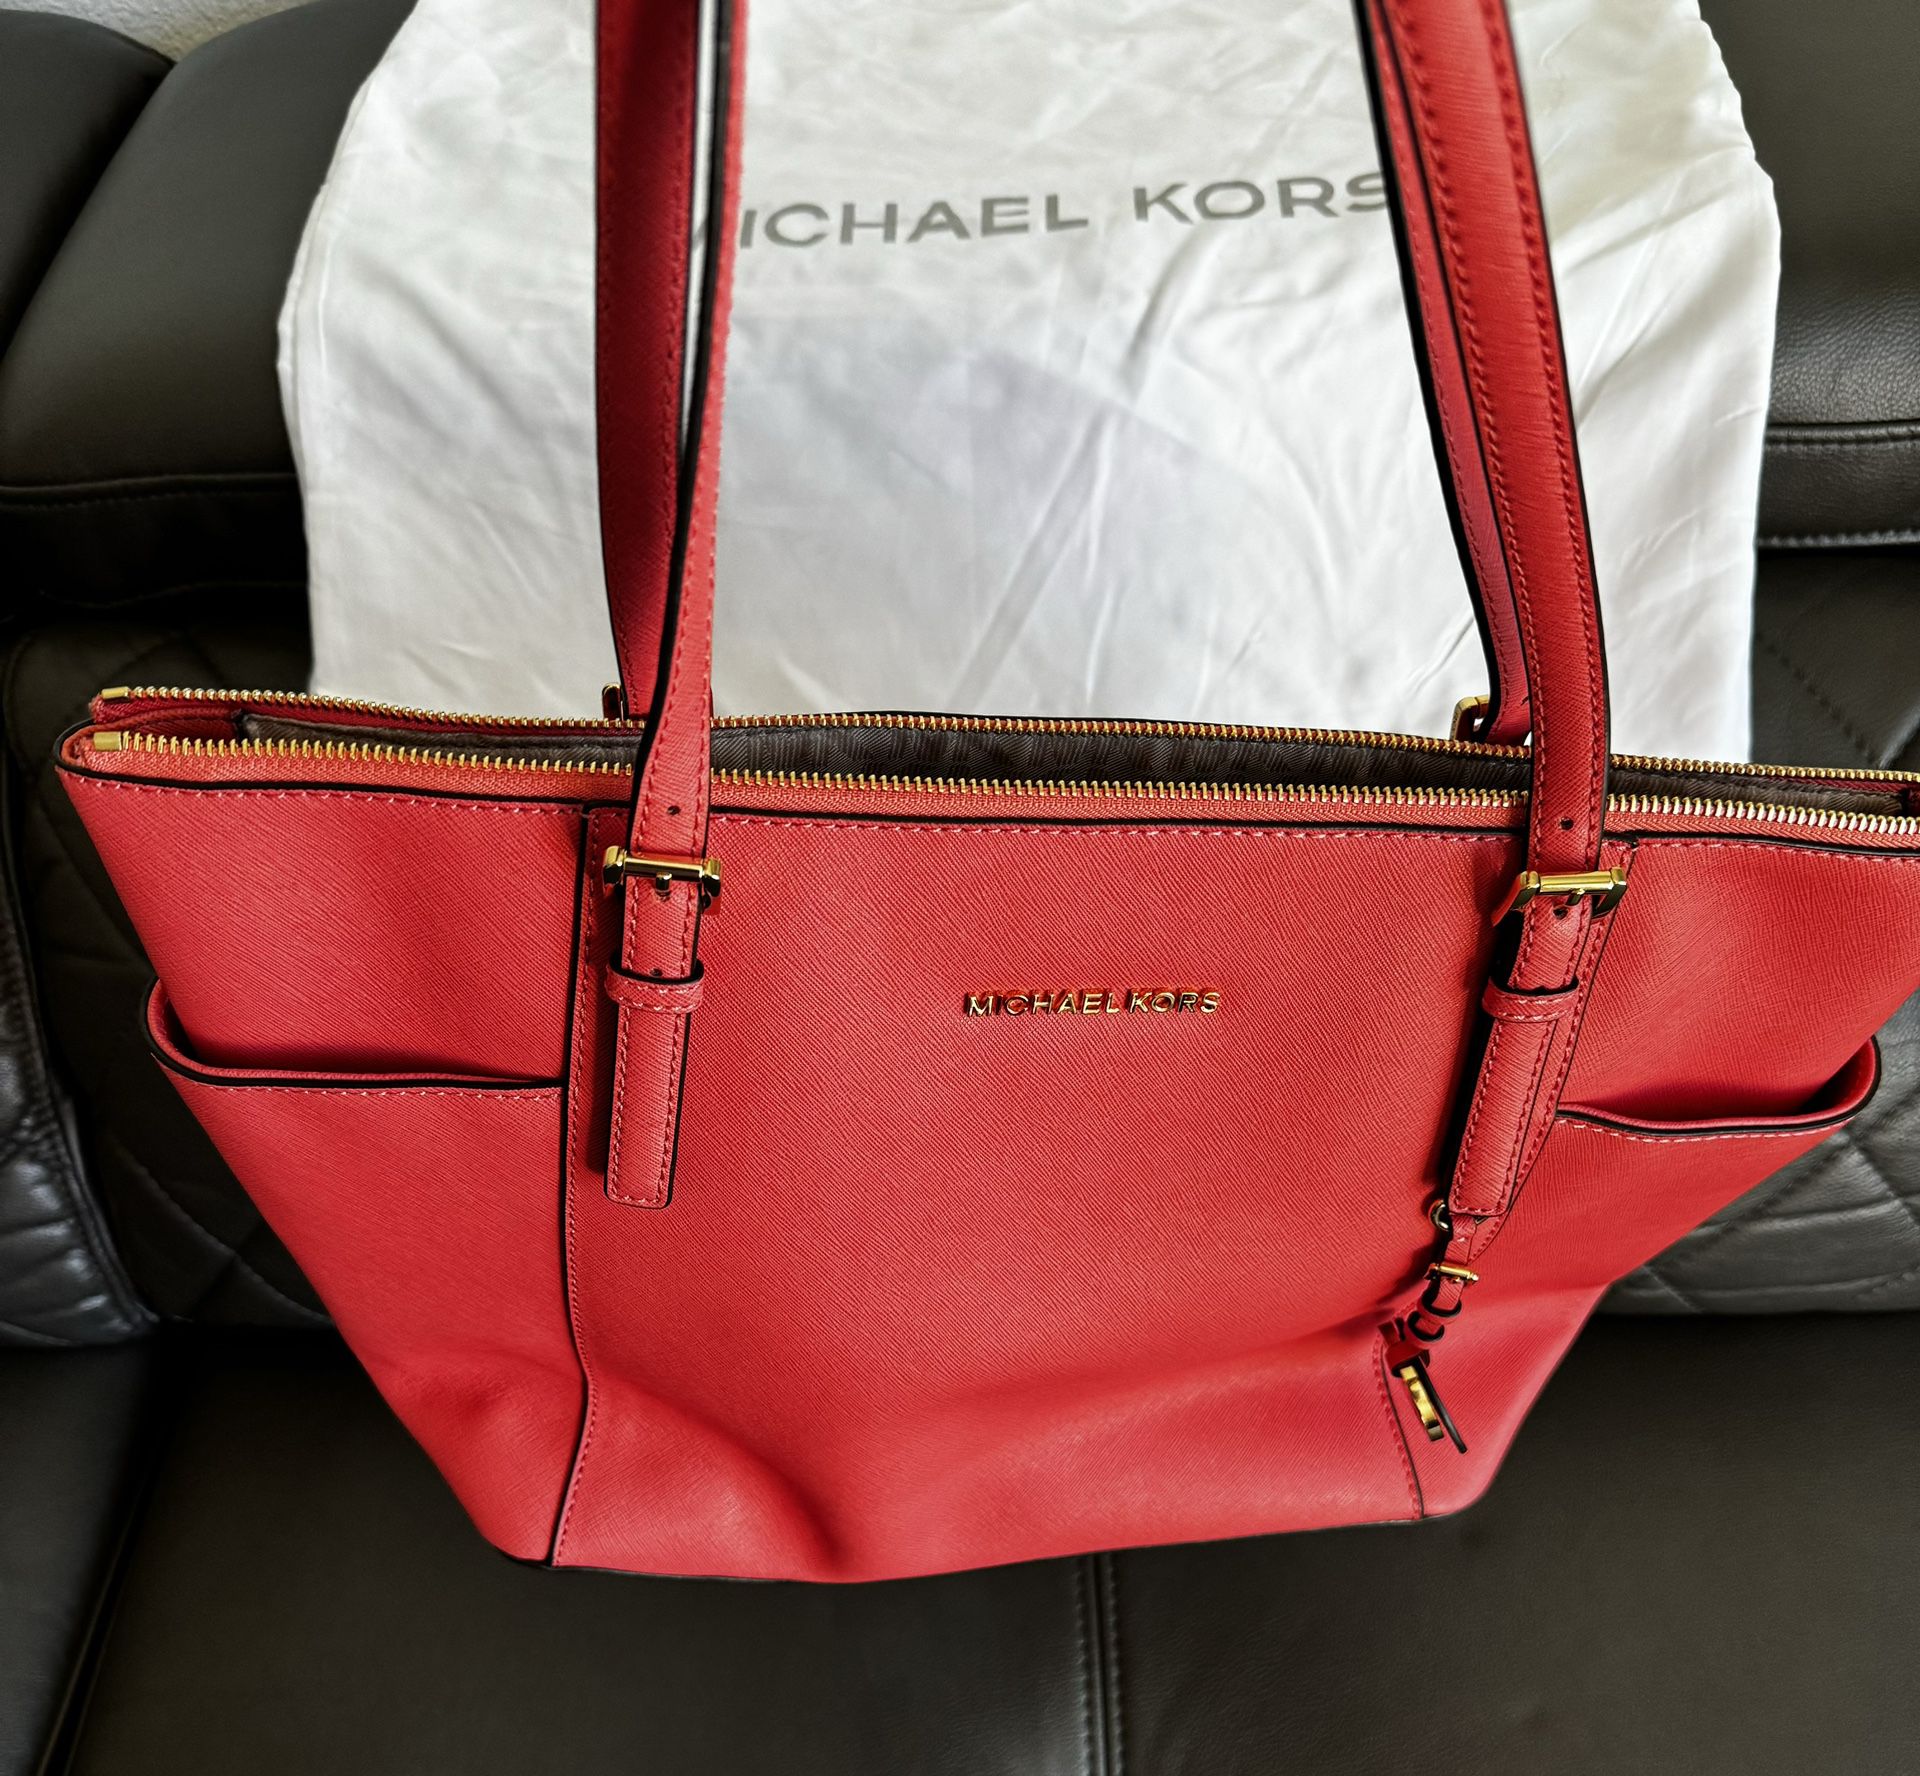 Michael Kors Large Top Zip Saffiano Leather Tote